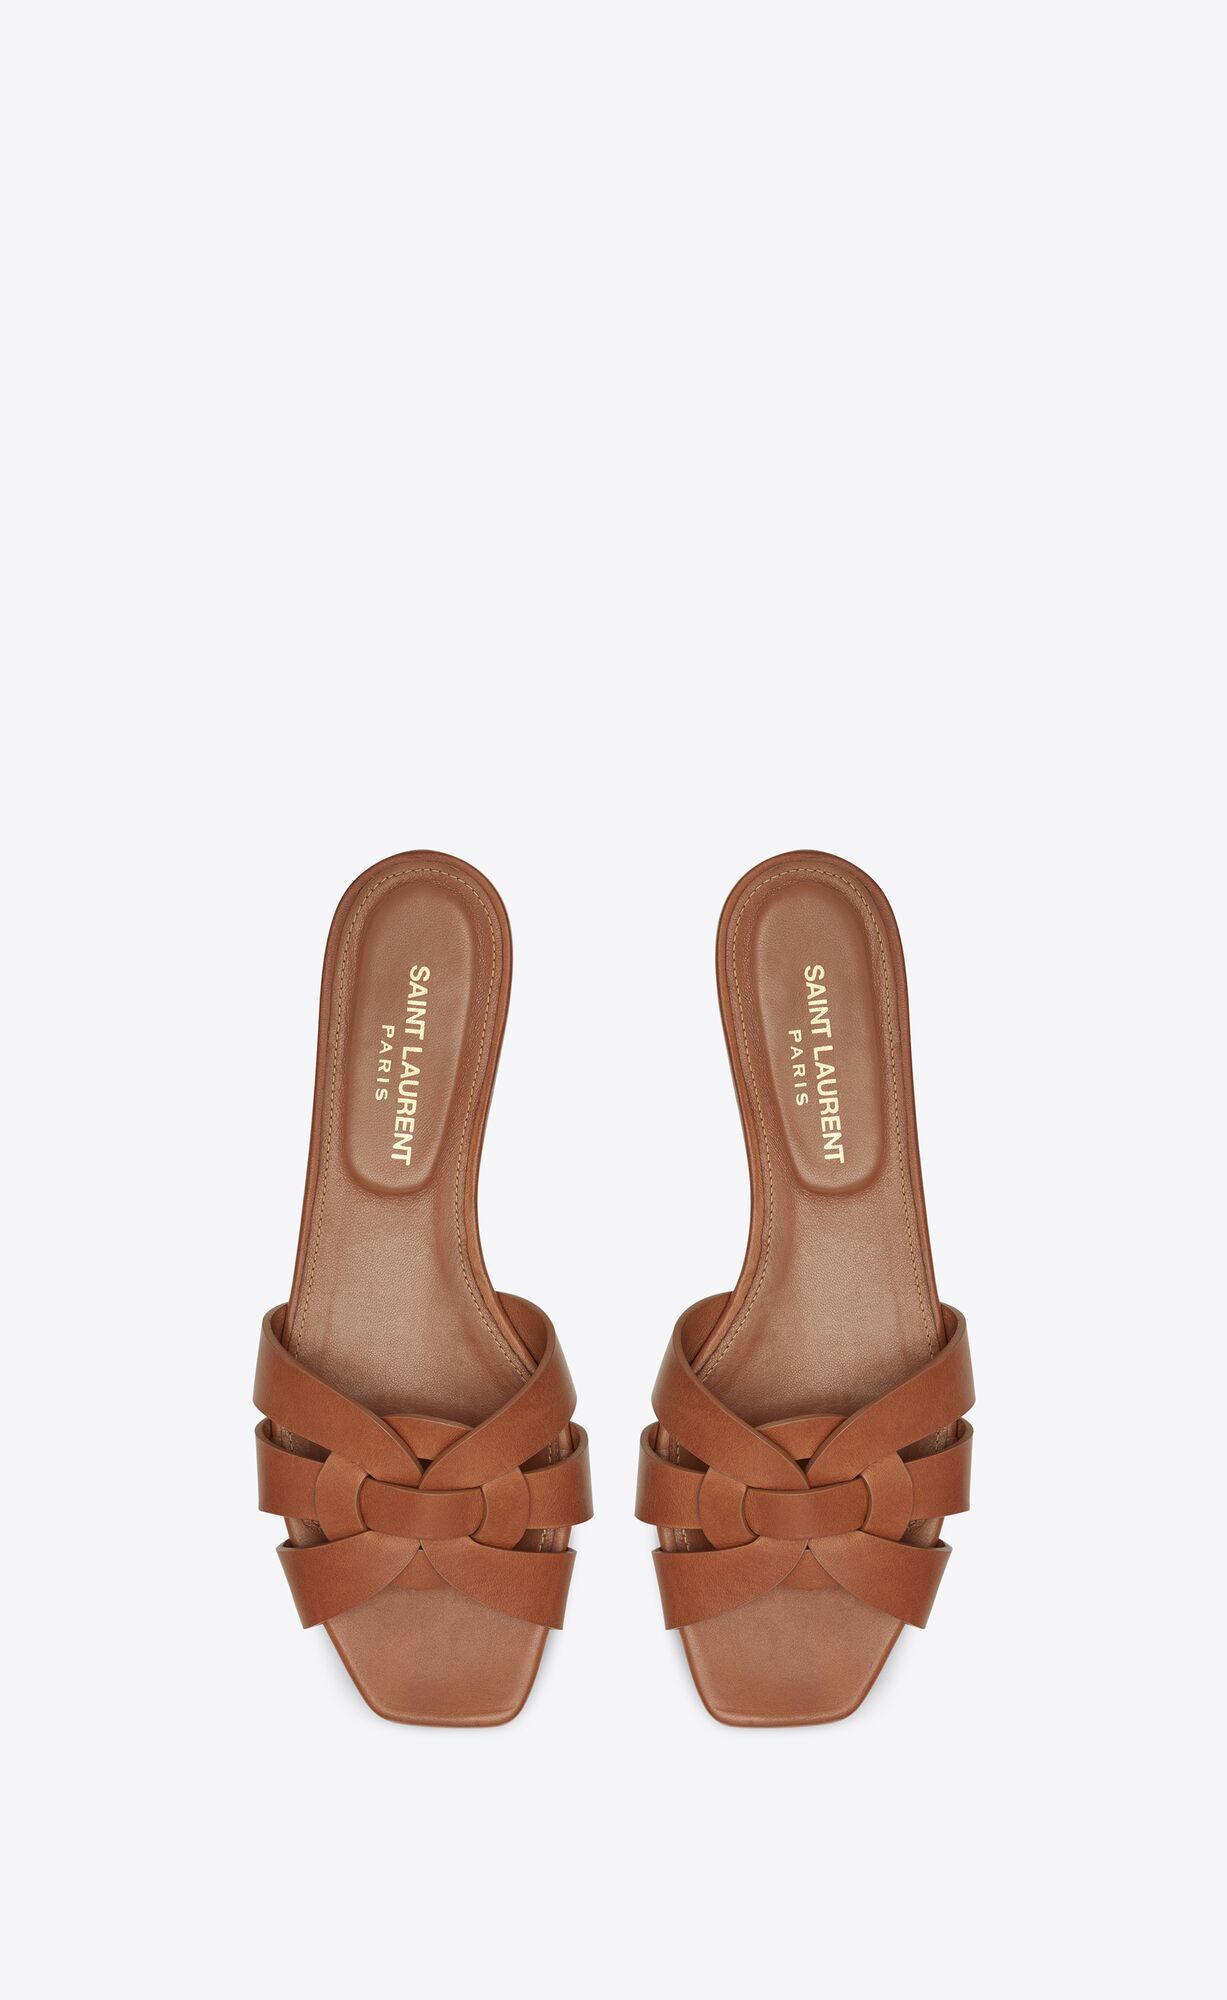 slide sandals made with metal-free tanned leather with intertwining straps. we recommend selectin... | Saint Laurent Inc. (Global)